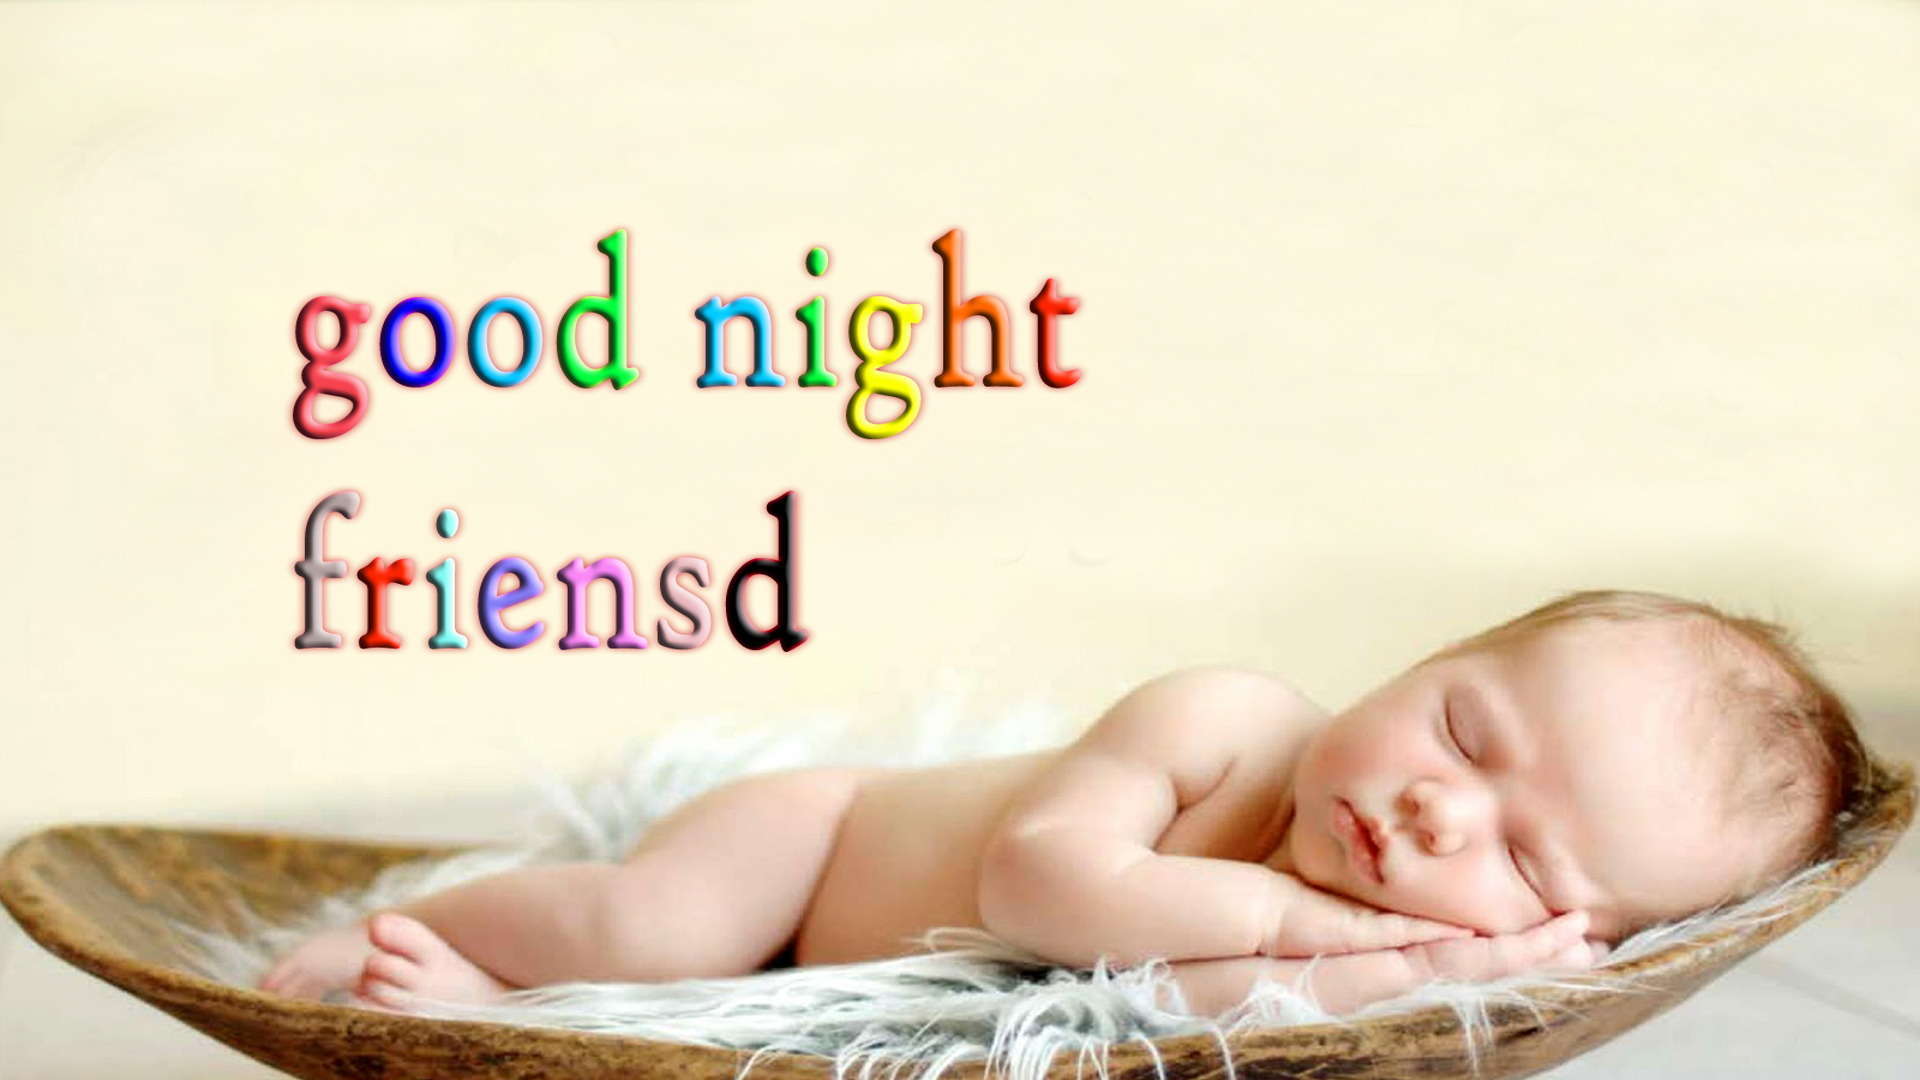 good night baby wallpaper,child,baby,product,text,skin